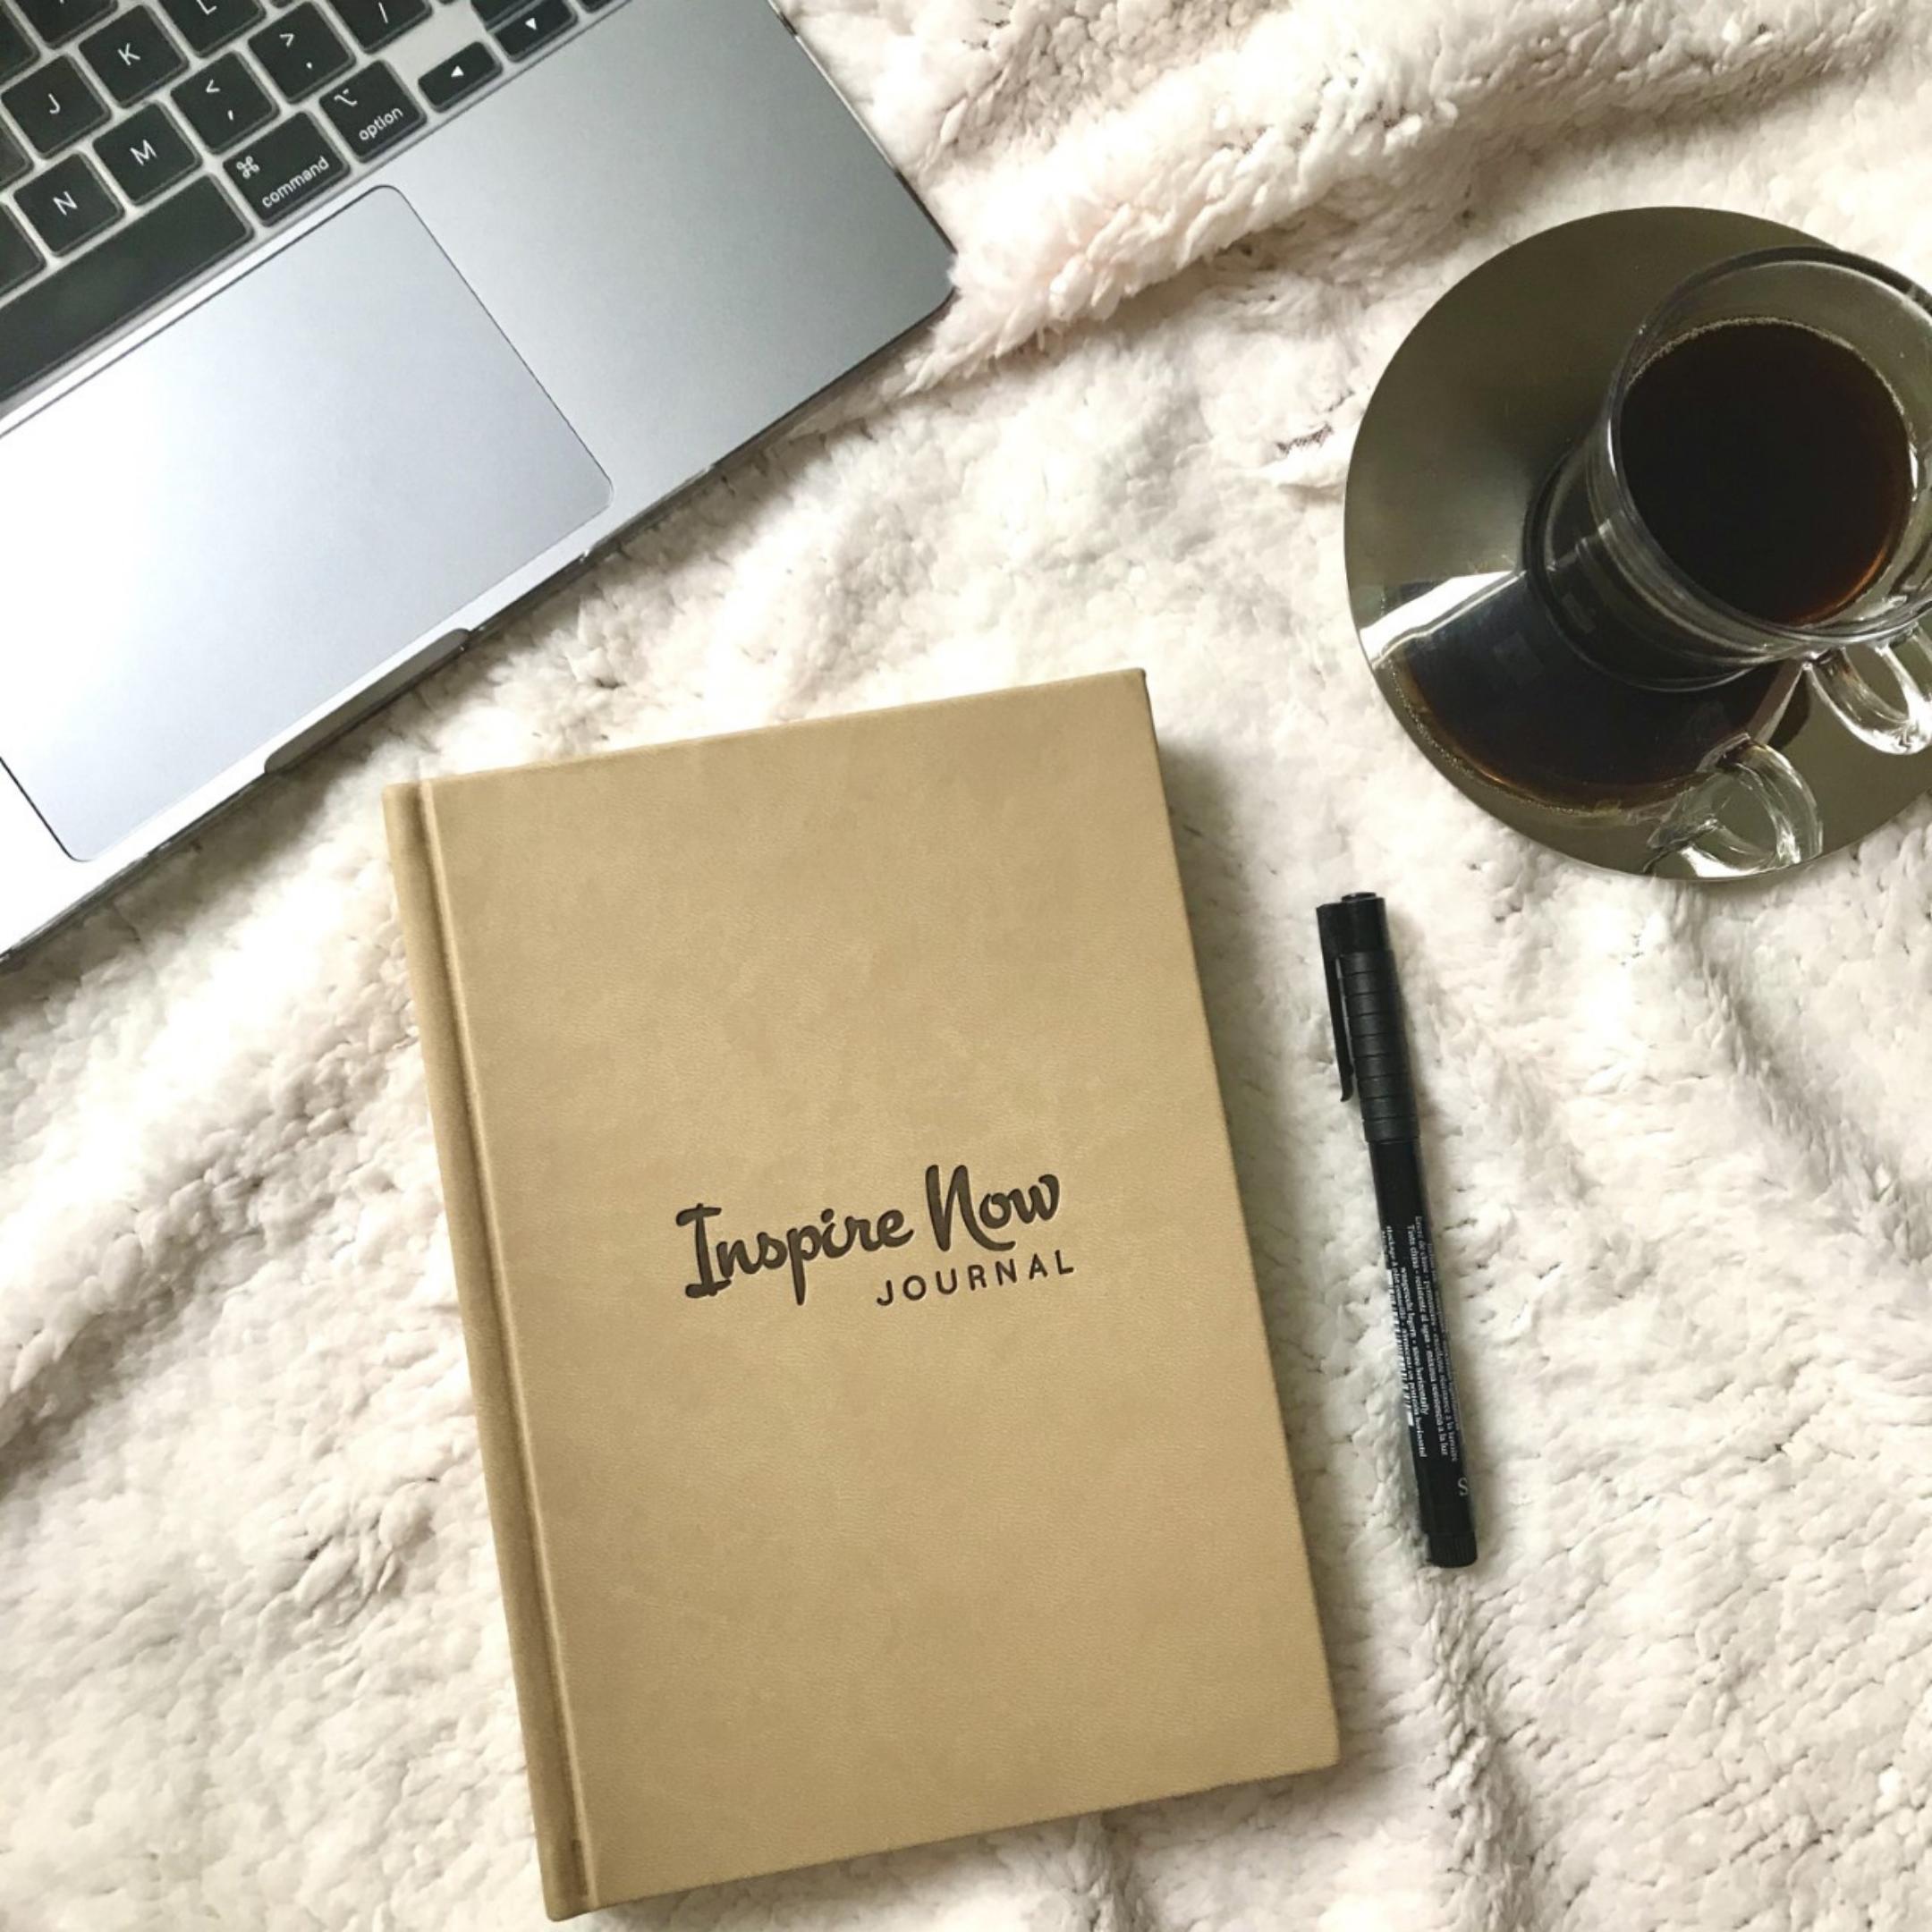 Inspire Now Journal - Productivity Planner - Organiser - Get things done - Journal - Goal Setting - Lifestyle Journal - Improve your life and wellbeing